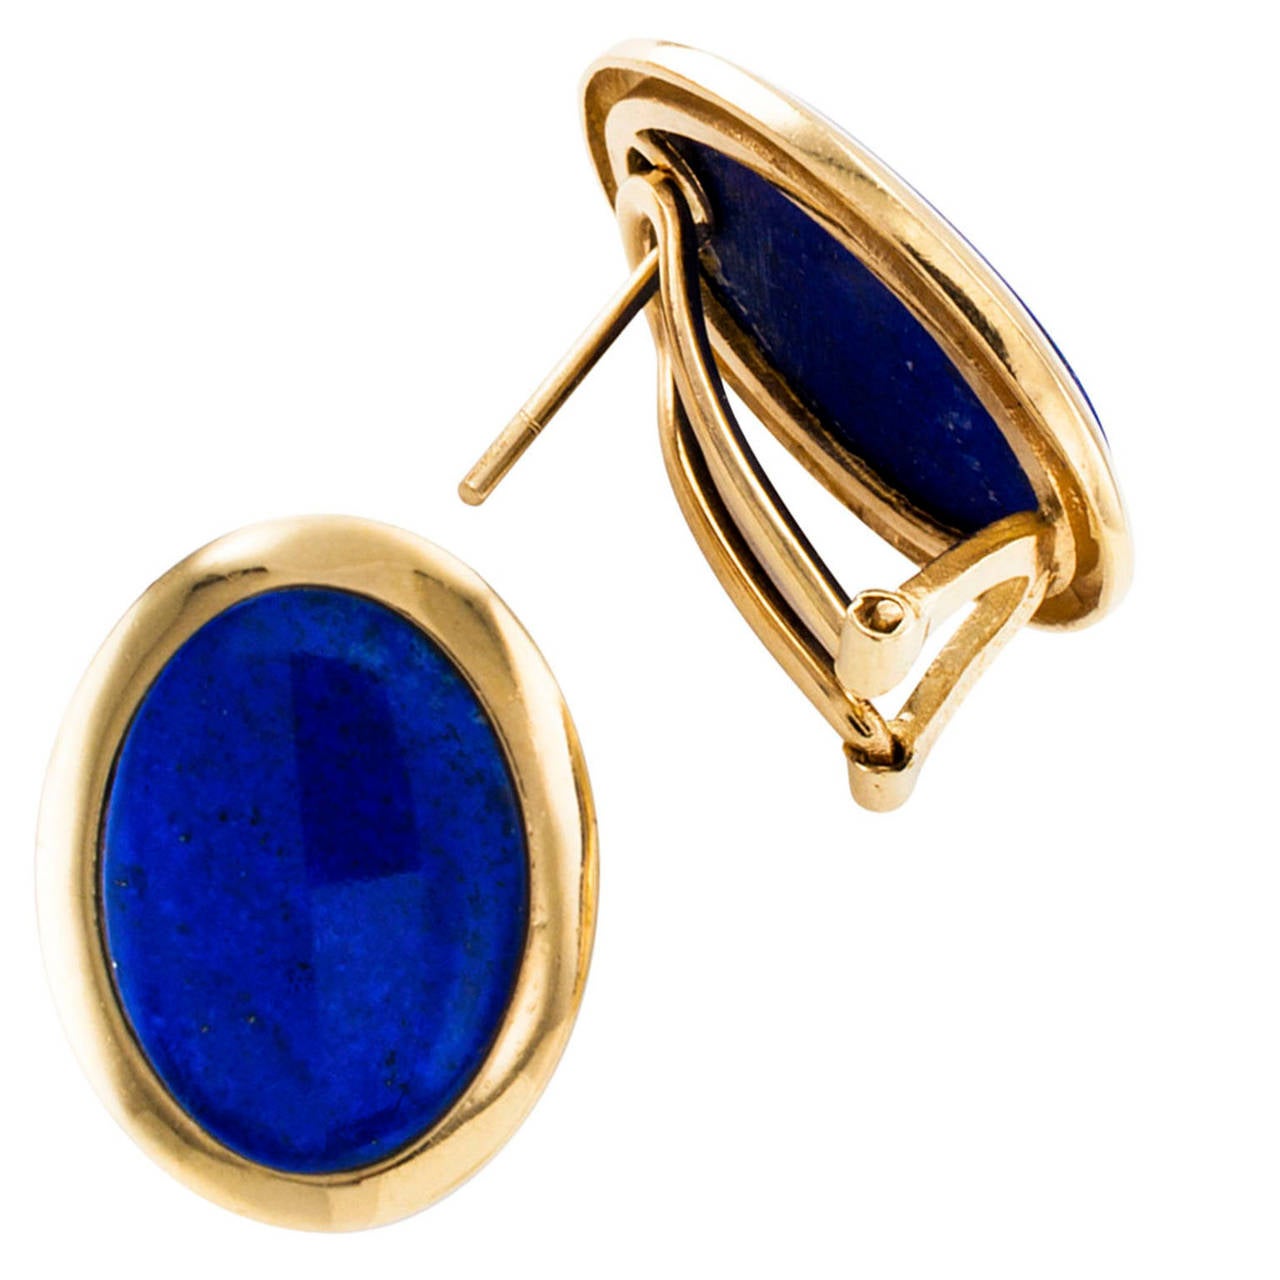 Lapis Lazuli and Gold Every-Day Earrings

Cool, cool lapis lazuli, ever so flattering to every complexion color, and so easy to coordinate with any type of wardrobe.  These super rich blue color natural lapis lazuli earrings have a larger size